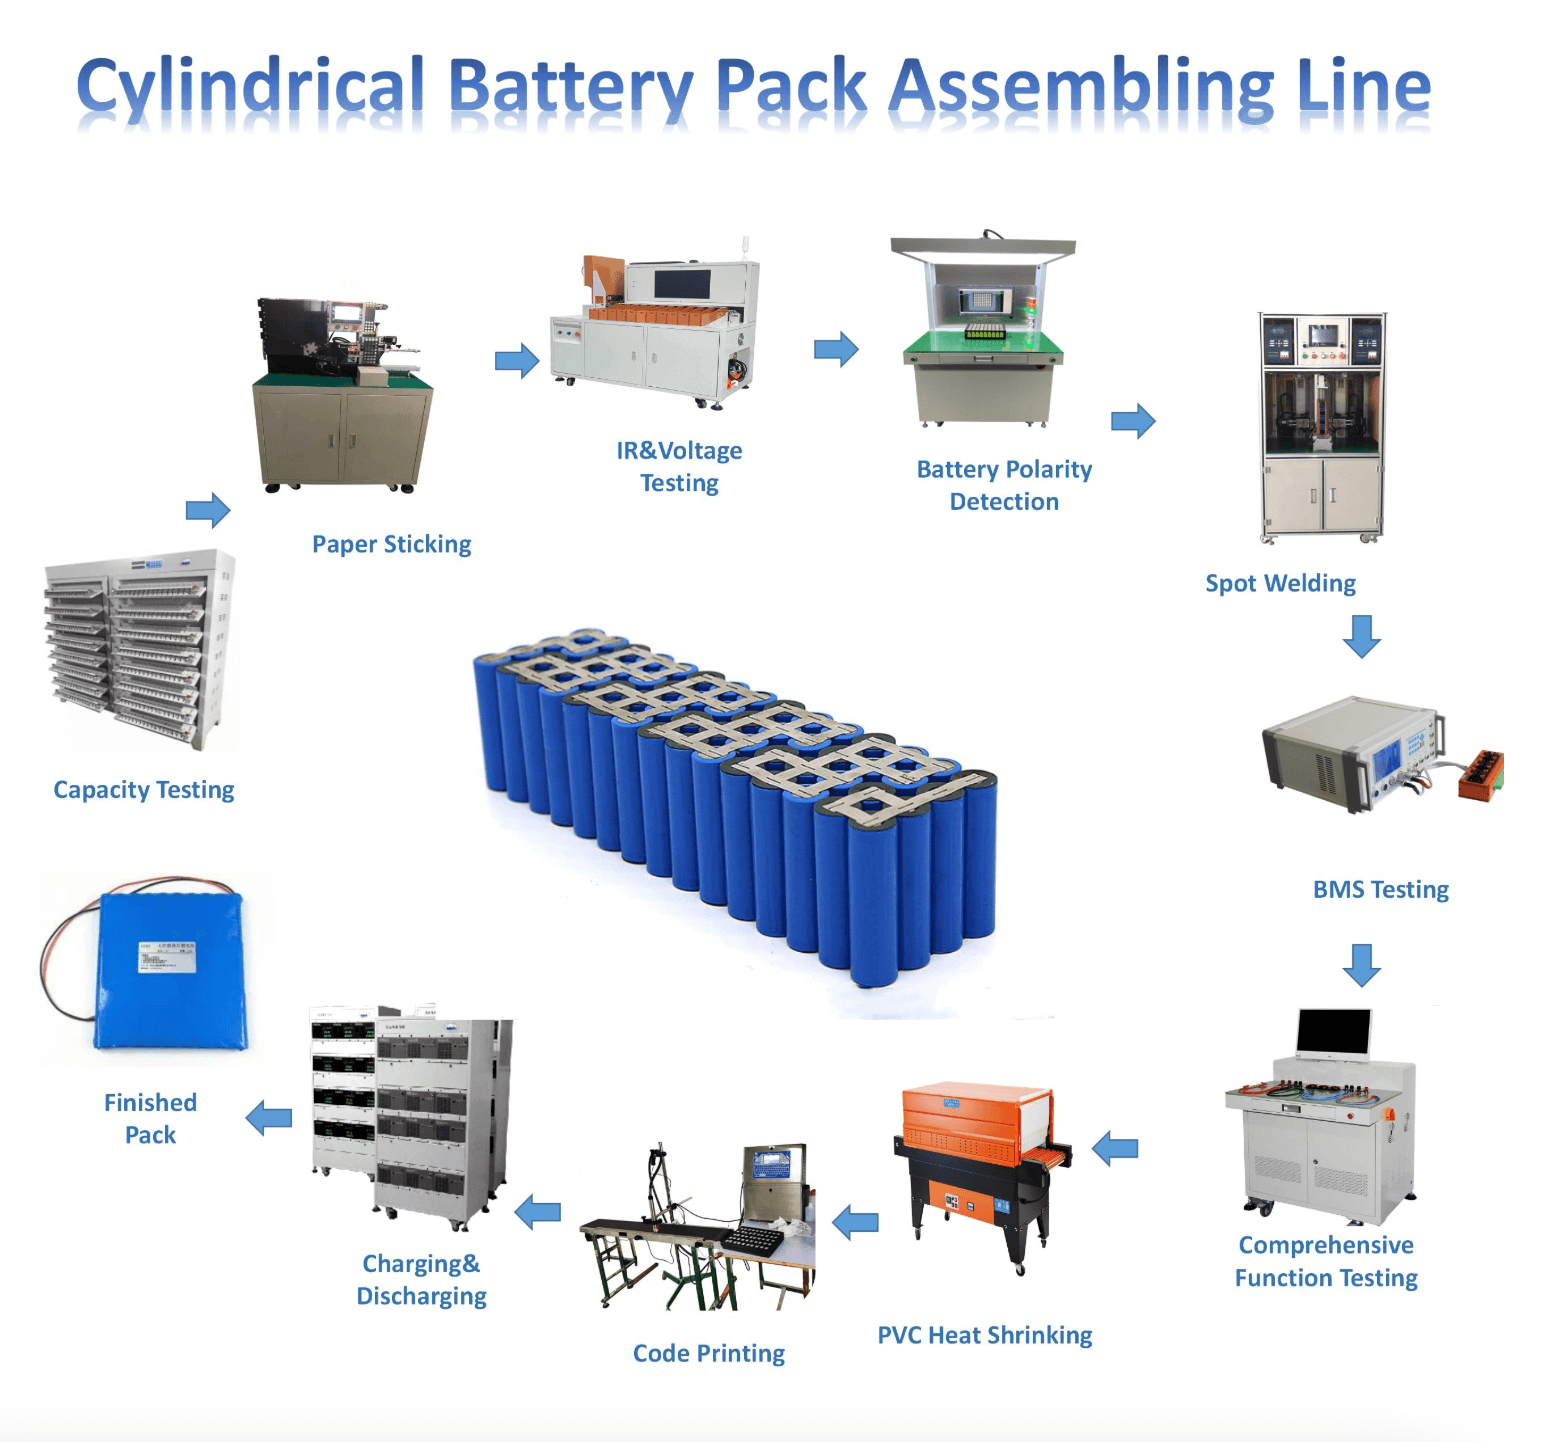 18650 Battery Pack assembly line